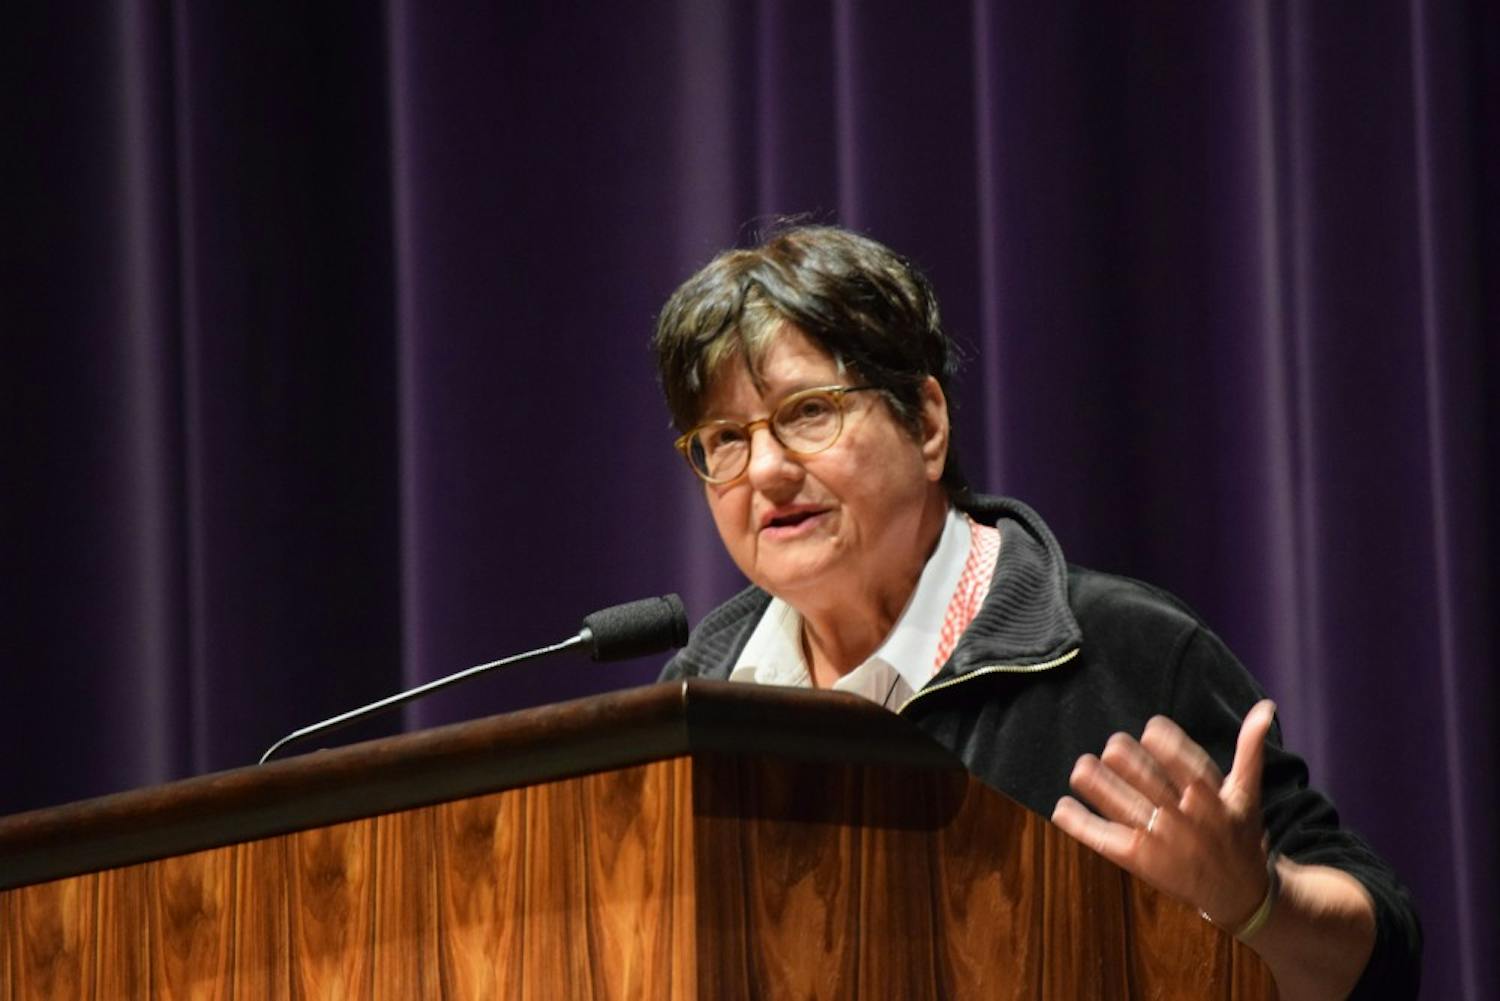 Sister Helen Prejean, the author of “Dead Man Walking: An Eyewitness Account of the Death Penalty,” speaks in a lecture on her book and her opinions on the death penalty in the MAC on Sunday.